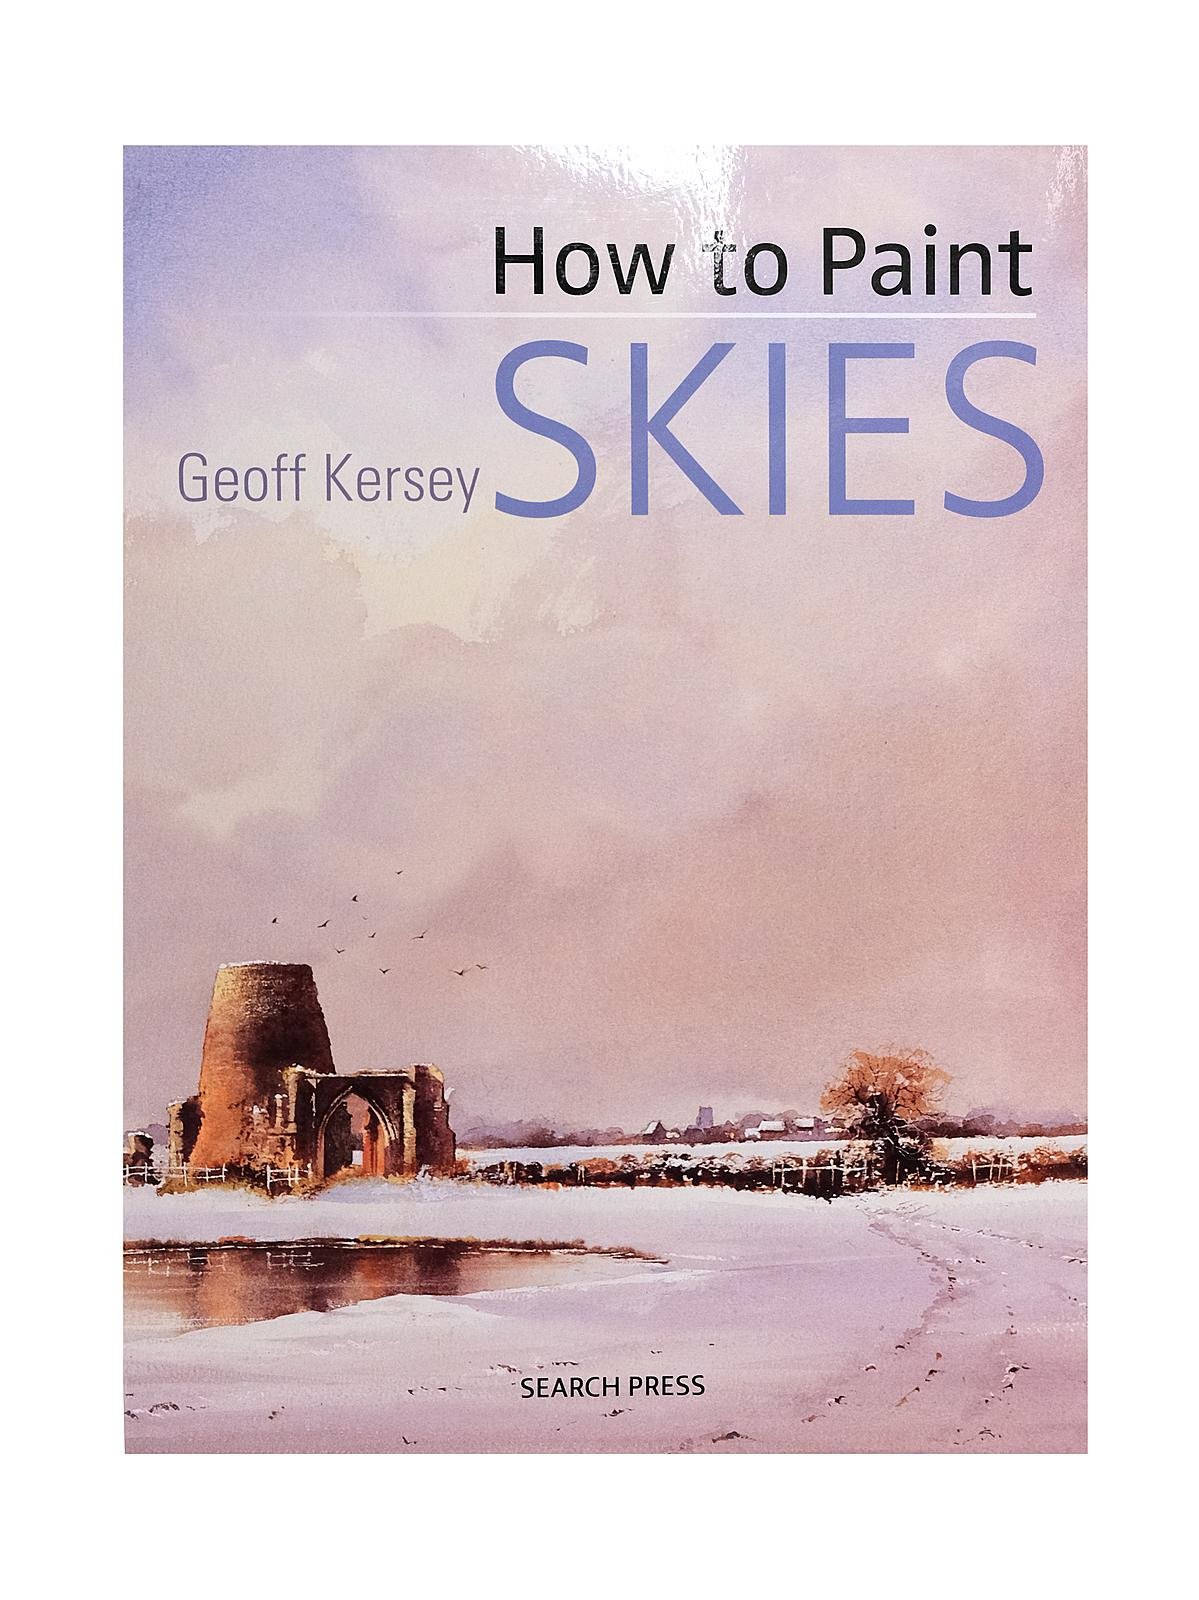 Search Press - How to Paint Skies